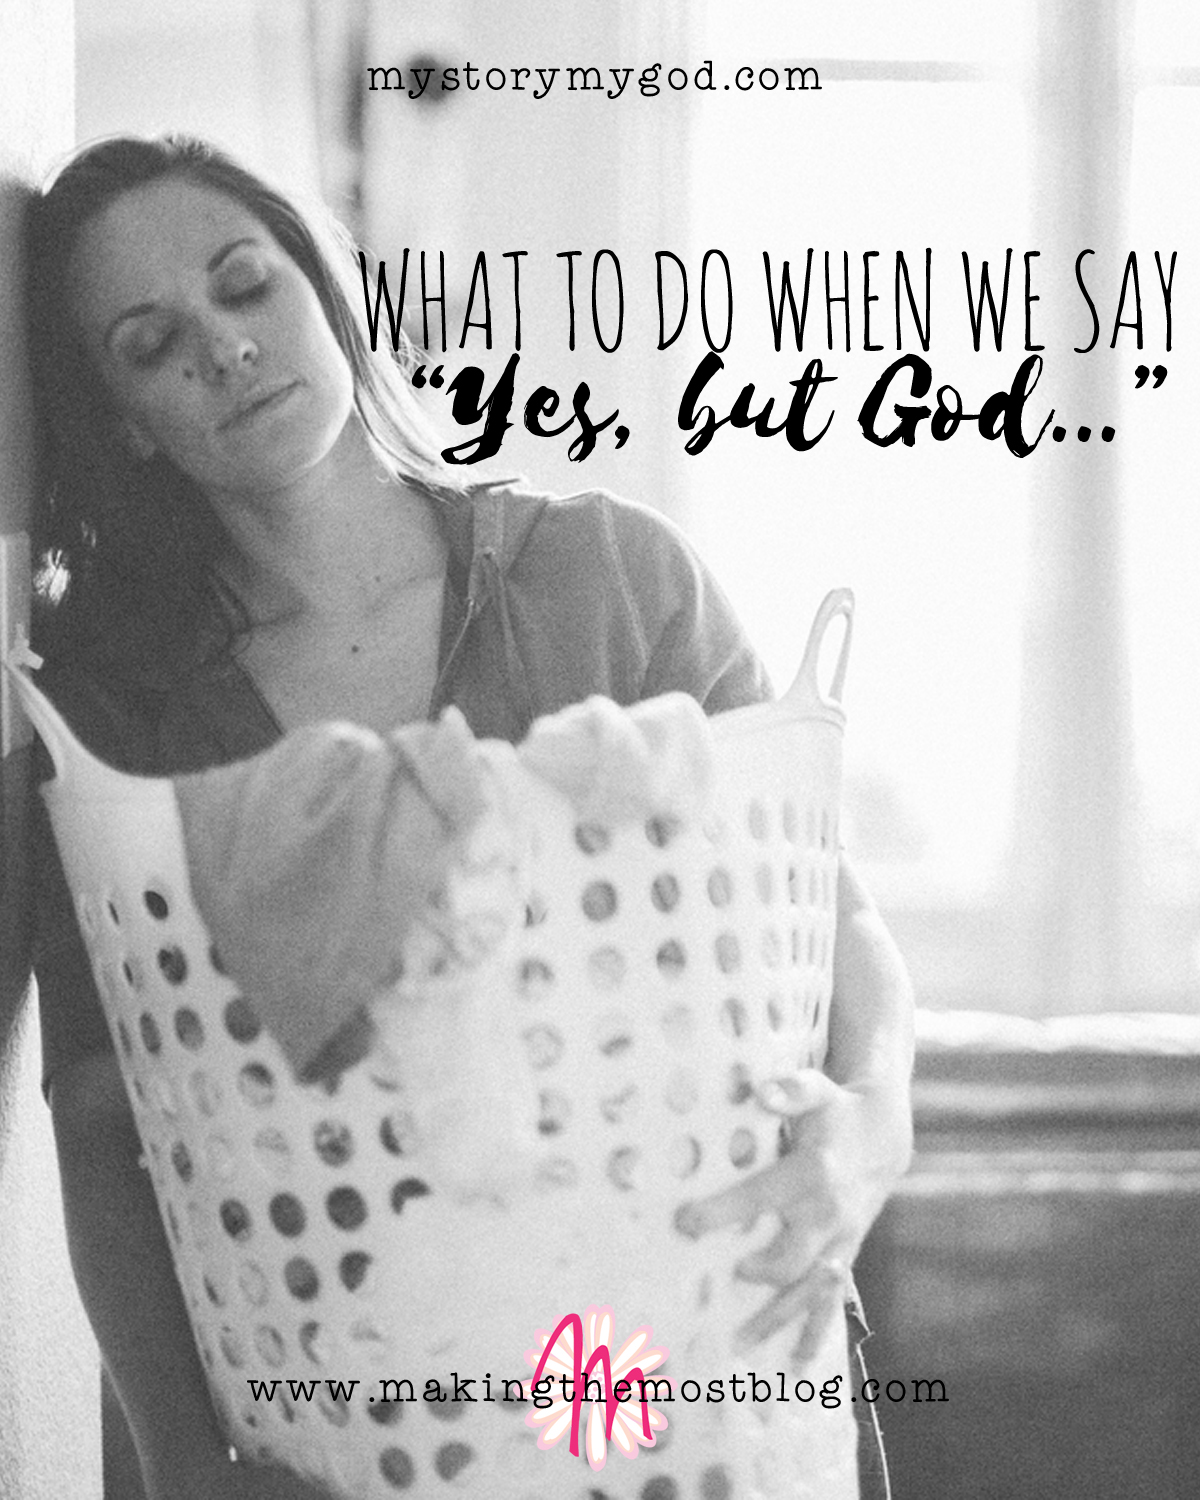 What to Do When We Say, “Yes, but God..." | Making the Most Blog